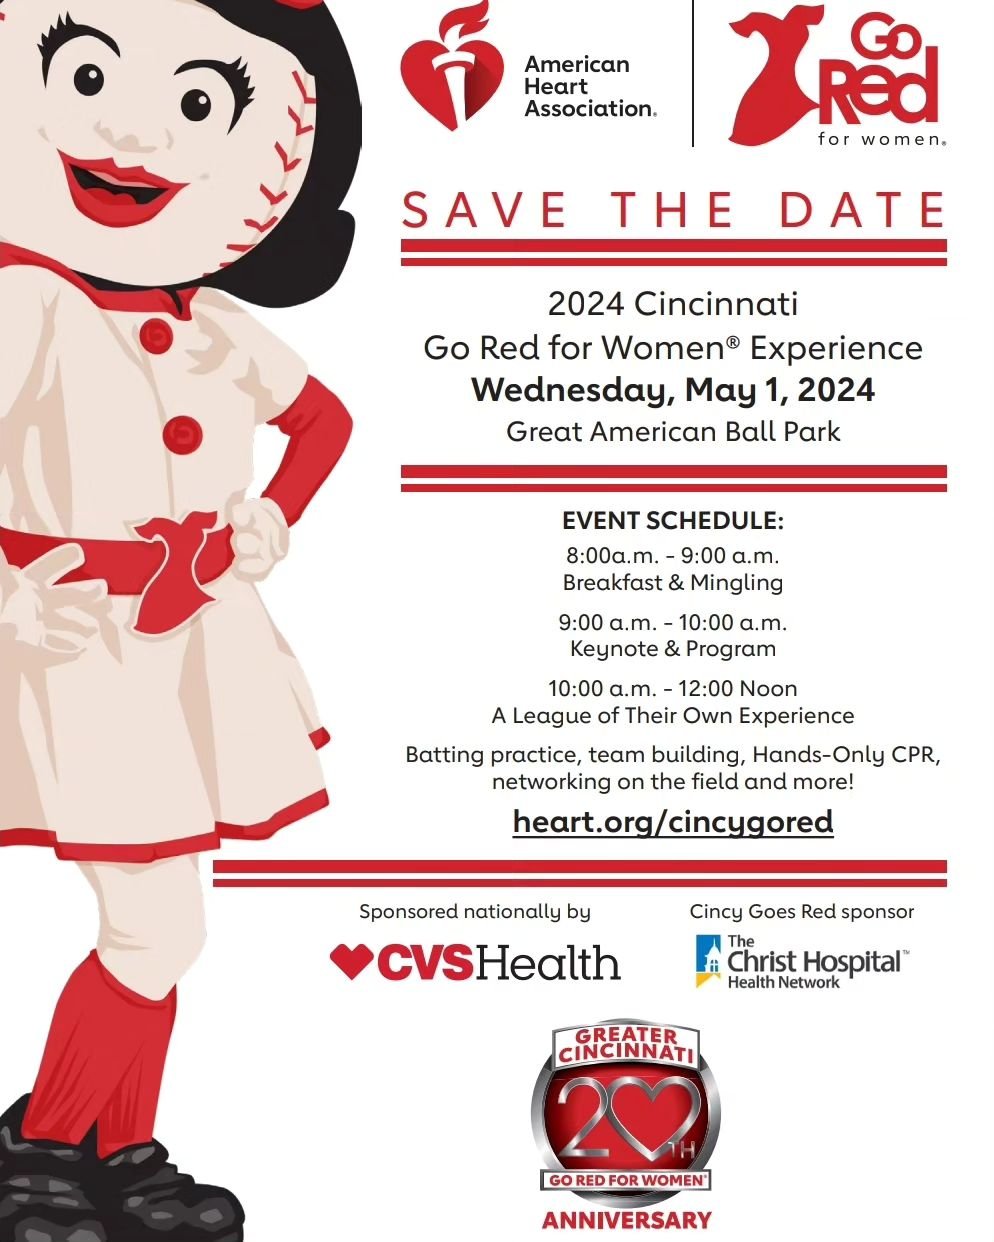 Karly (@physio.kmaines ) and Rakhi will be representing QCPH this Wednesday at the Cincinnati Go Red for Women Experience! We believe in whole health, and that means focusing on cardiovascular health as well as pelvic health. Will we see you there? 
